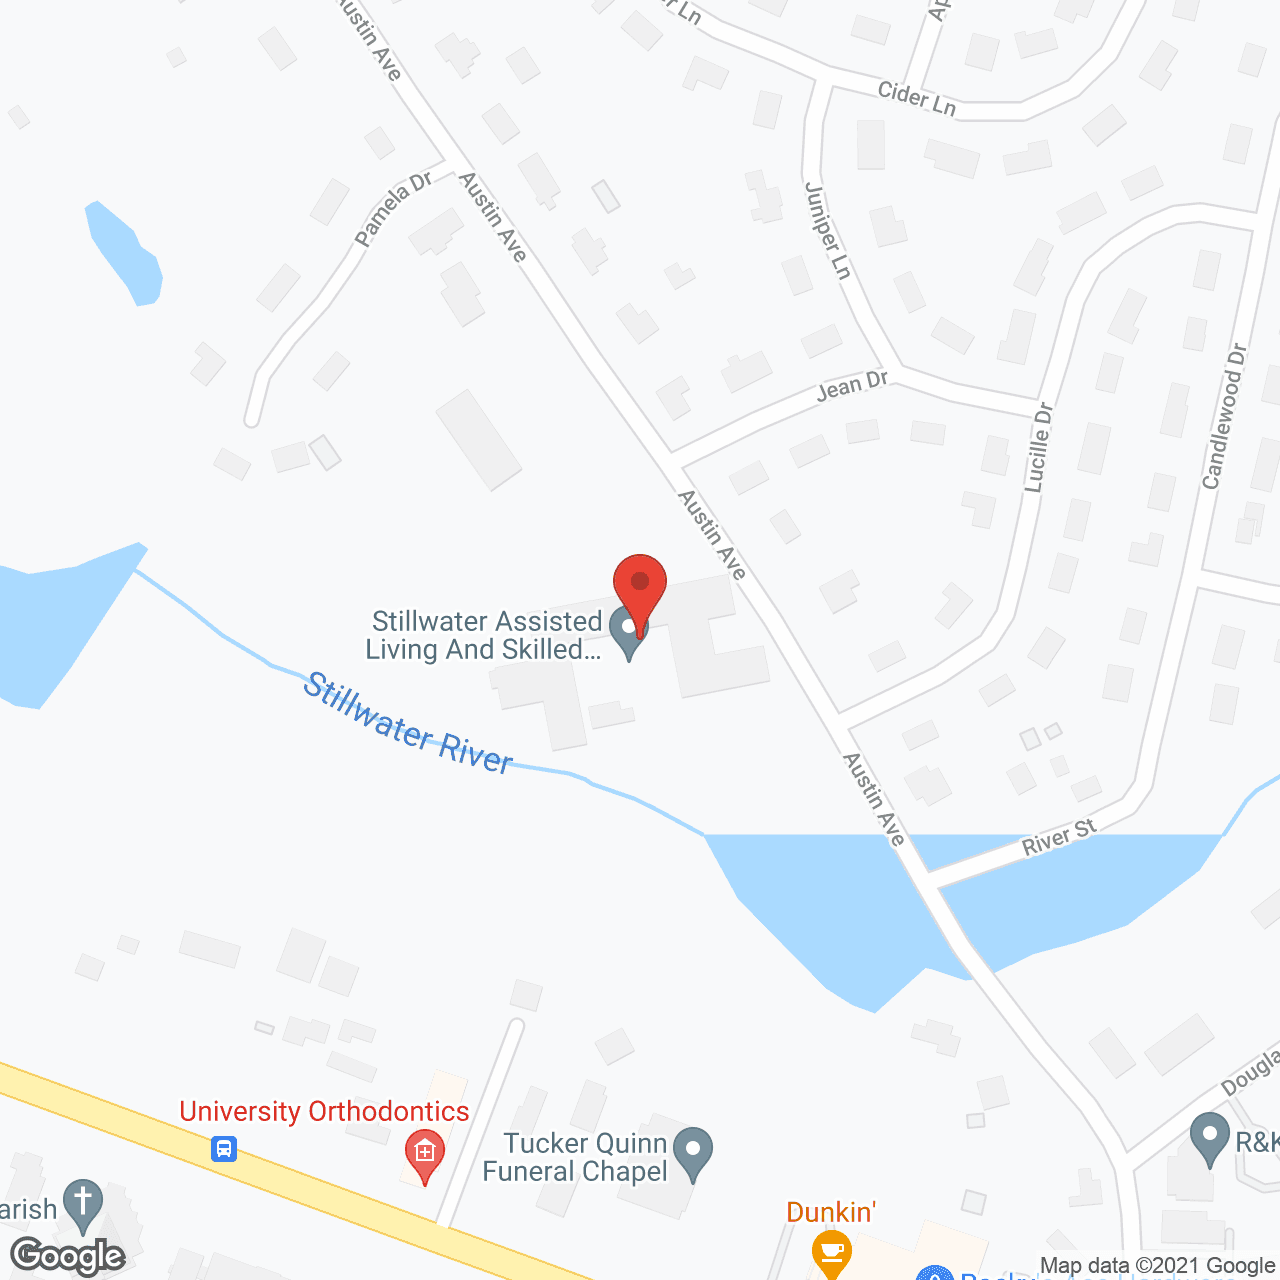 Stillwater Assisted Living Community in google map